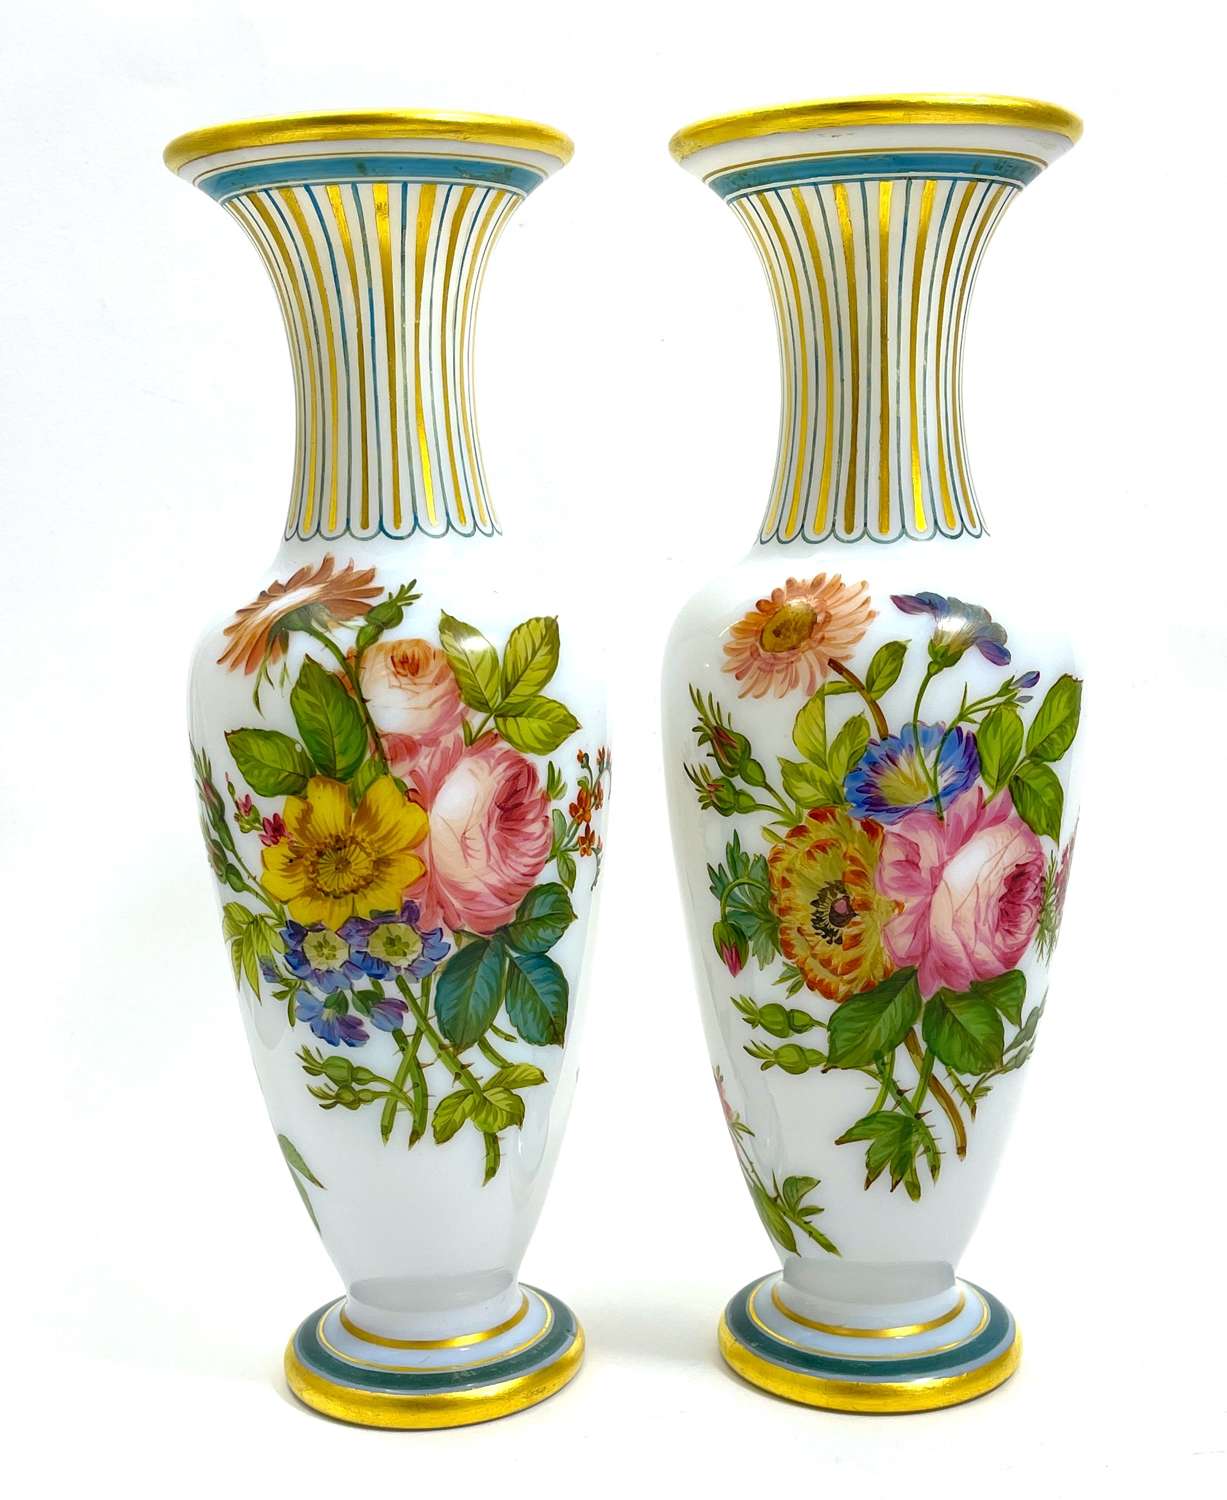 A Pair of Antique Baccarat Opaline Glass Vases by Jean Francois Robert